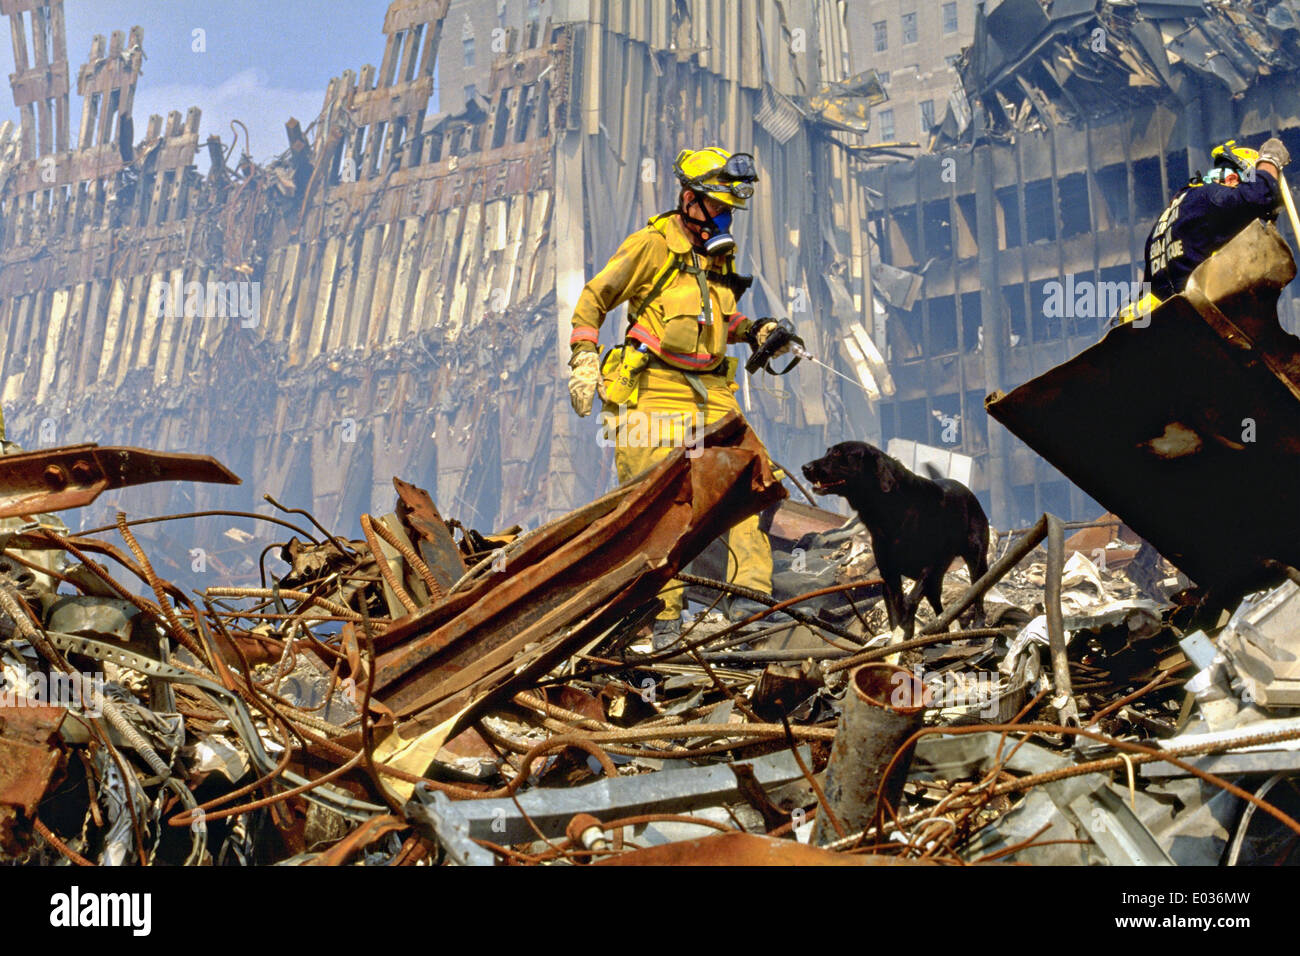 Urban Search and Rescue teams search for survivors amongst the wreckage of the World Trade Center following a massive terror attack which destroyed the twin towers killing 2,606 people September 21, 2001 in New York, NY. Stock Photo